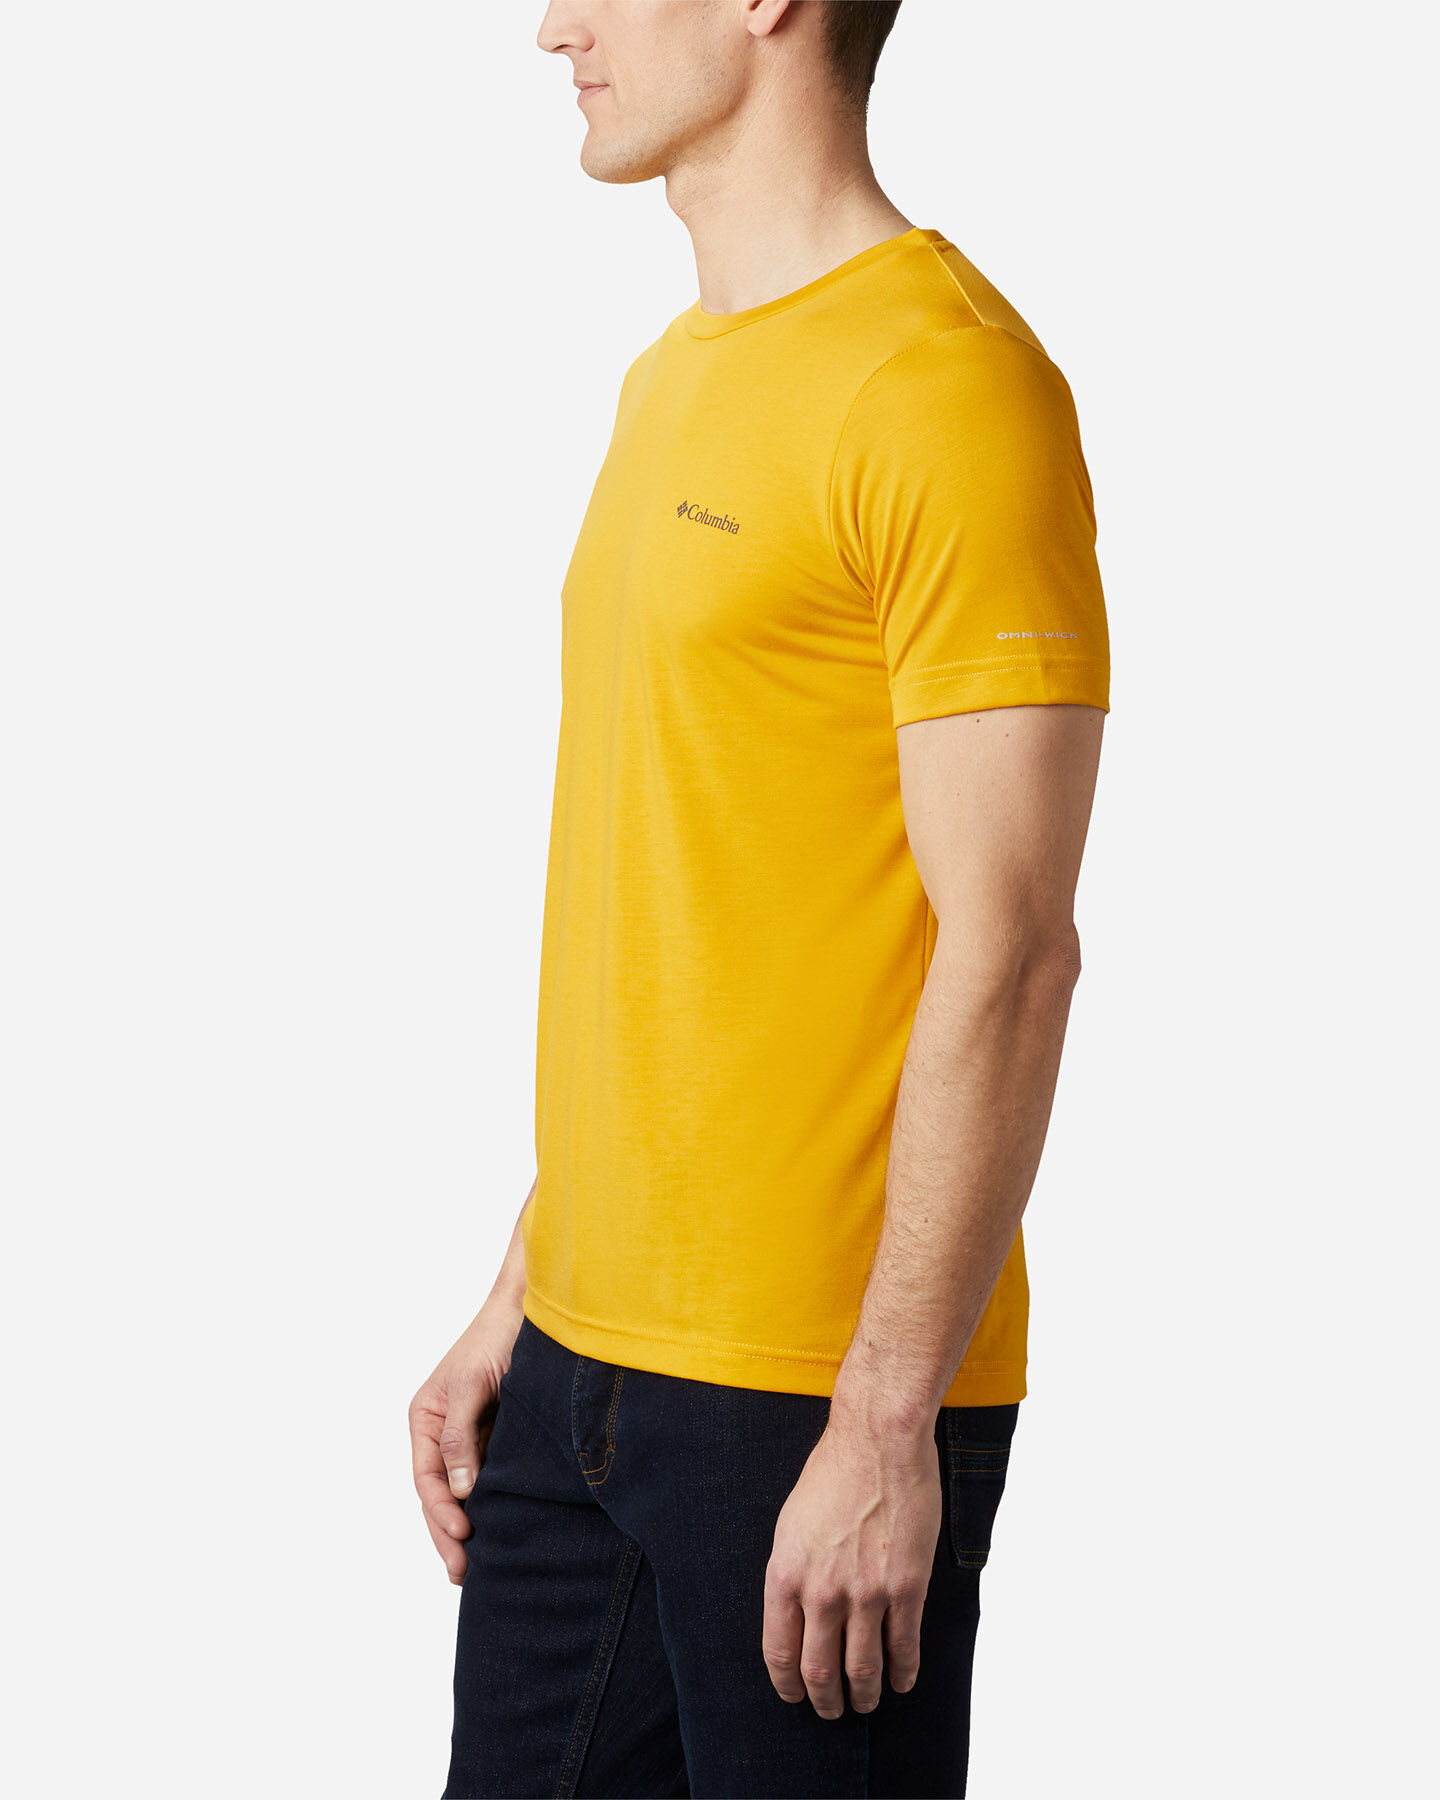  T-Shirt COLUMBIA MAXTRAIL LOGO M S5174869|790|S scatto 2